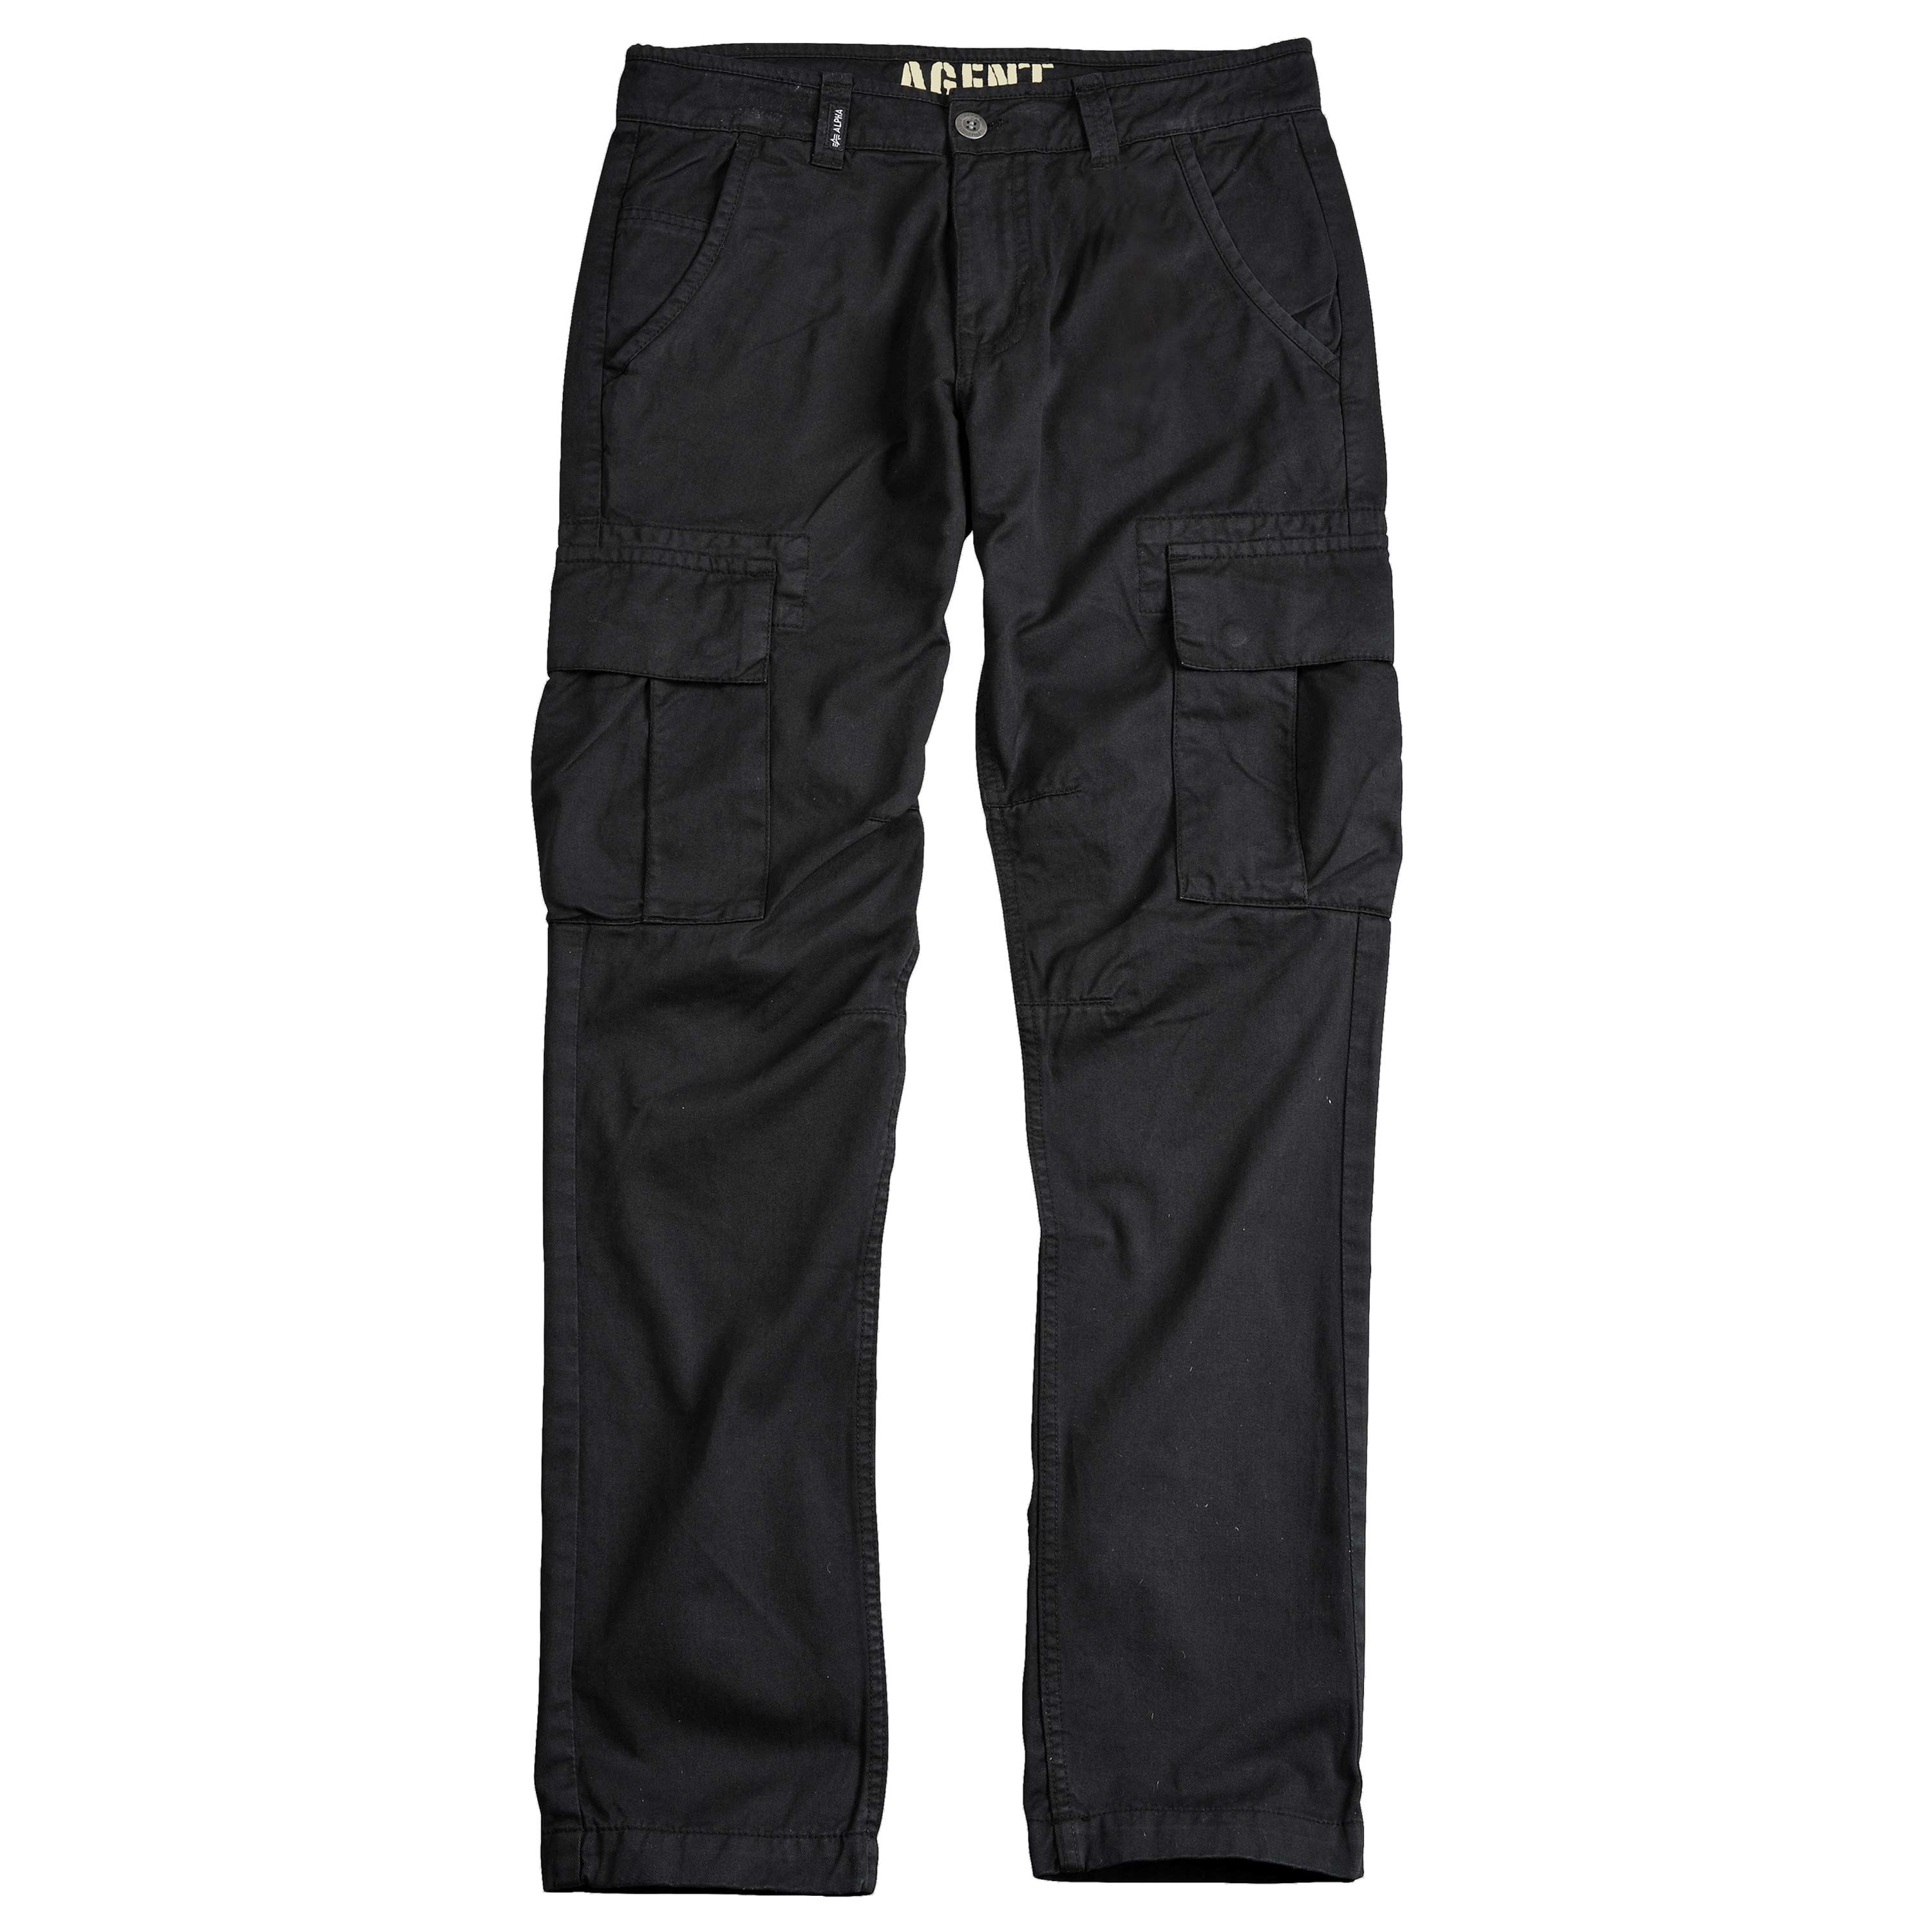 Pants by black Agent Industries Purchase the Alpha ASMC